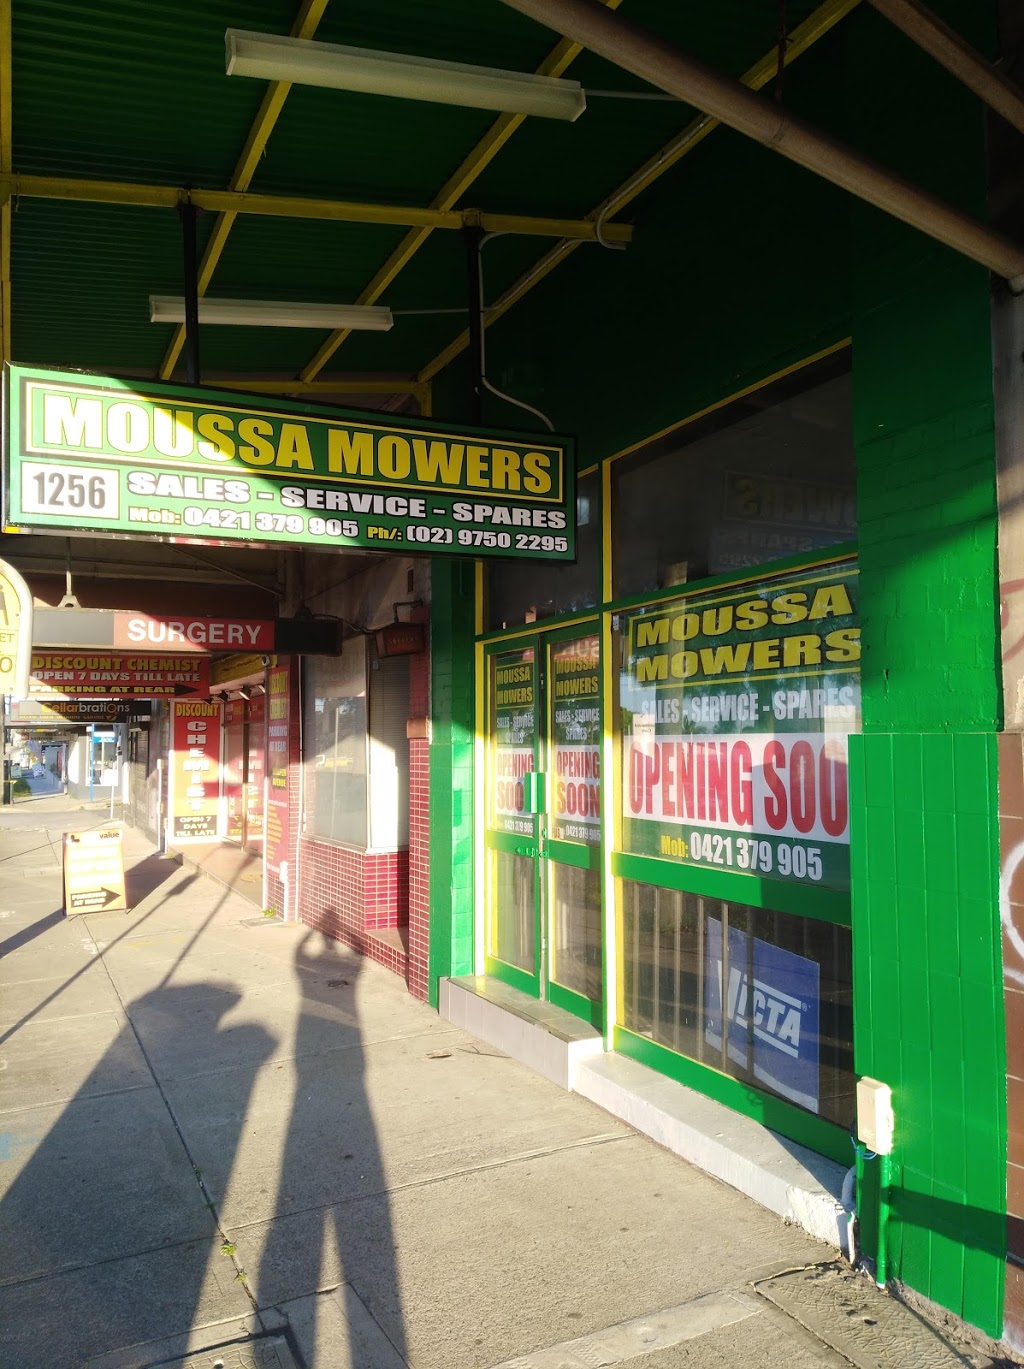 Moussa Mowers | store | 1256 Canterbury Rd, Punchbowl NSW 2196, Australia | 0297502295 OR +61 2 9750 2295